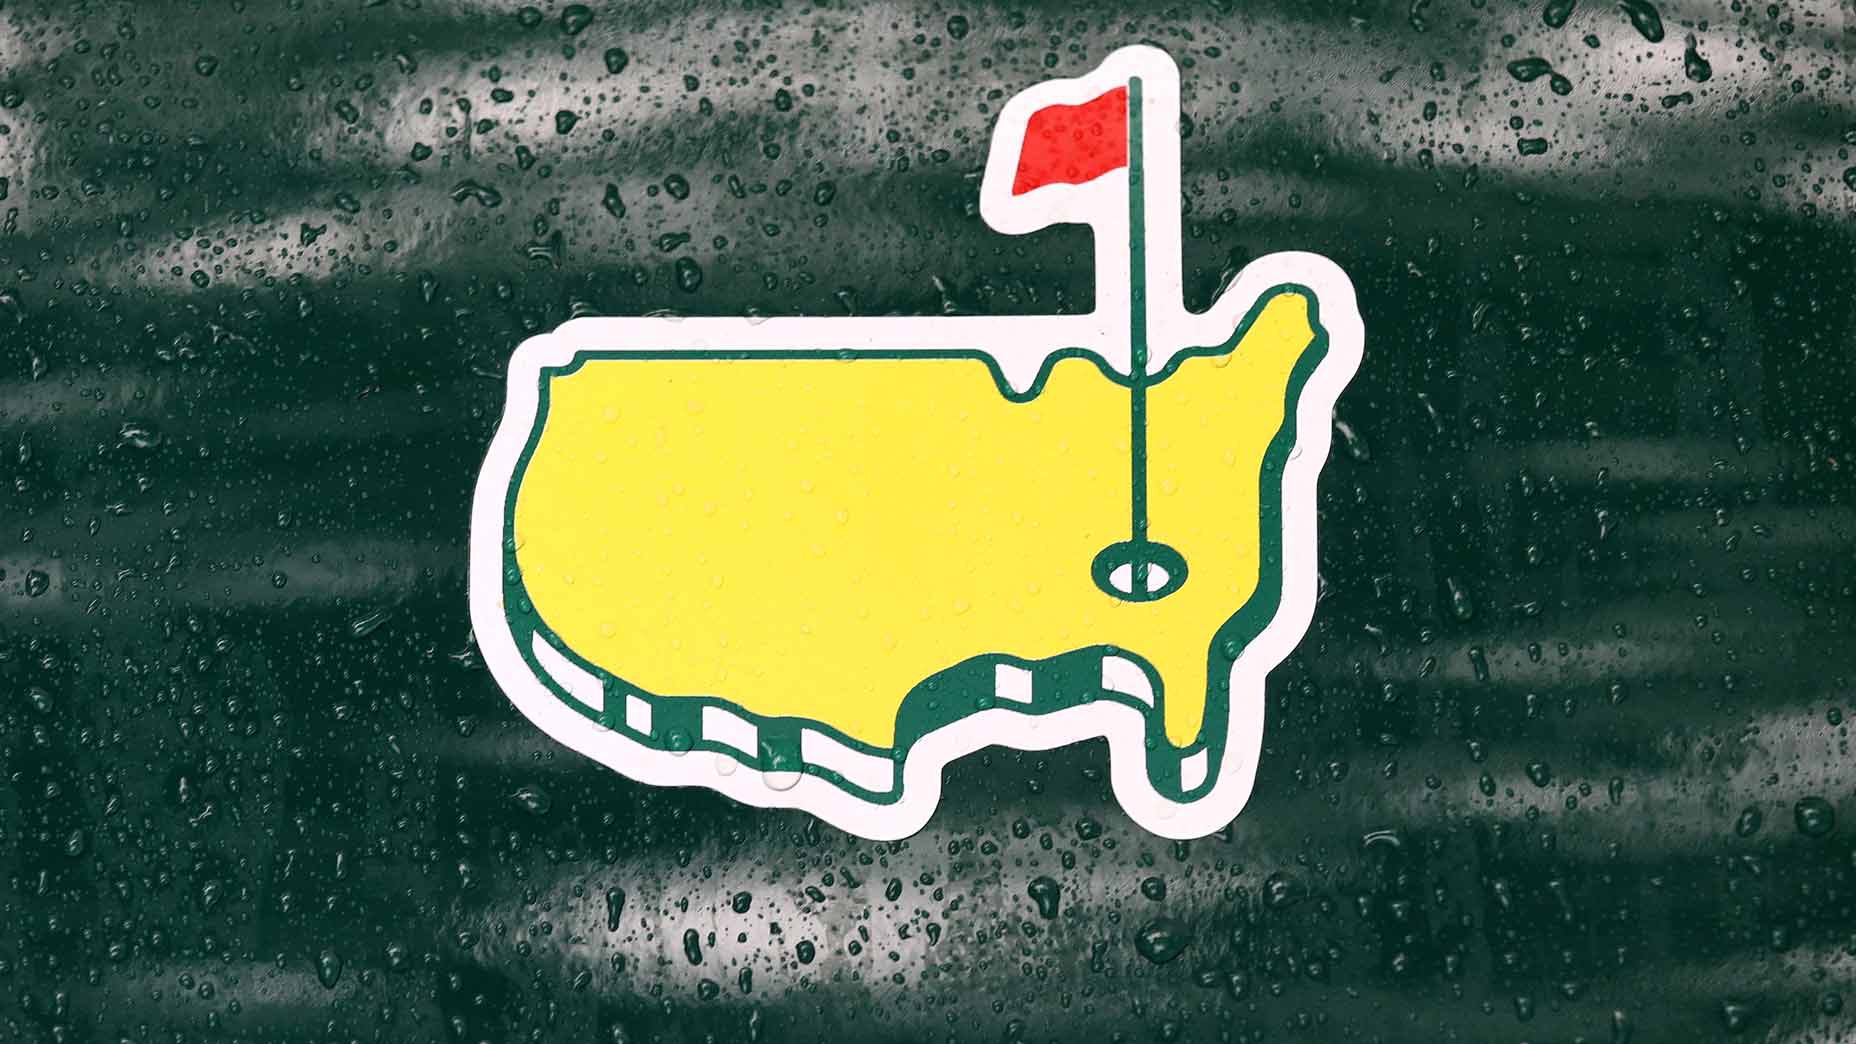 2023 Masters Saturday third round tee times and pairings